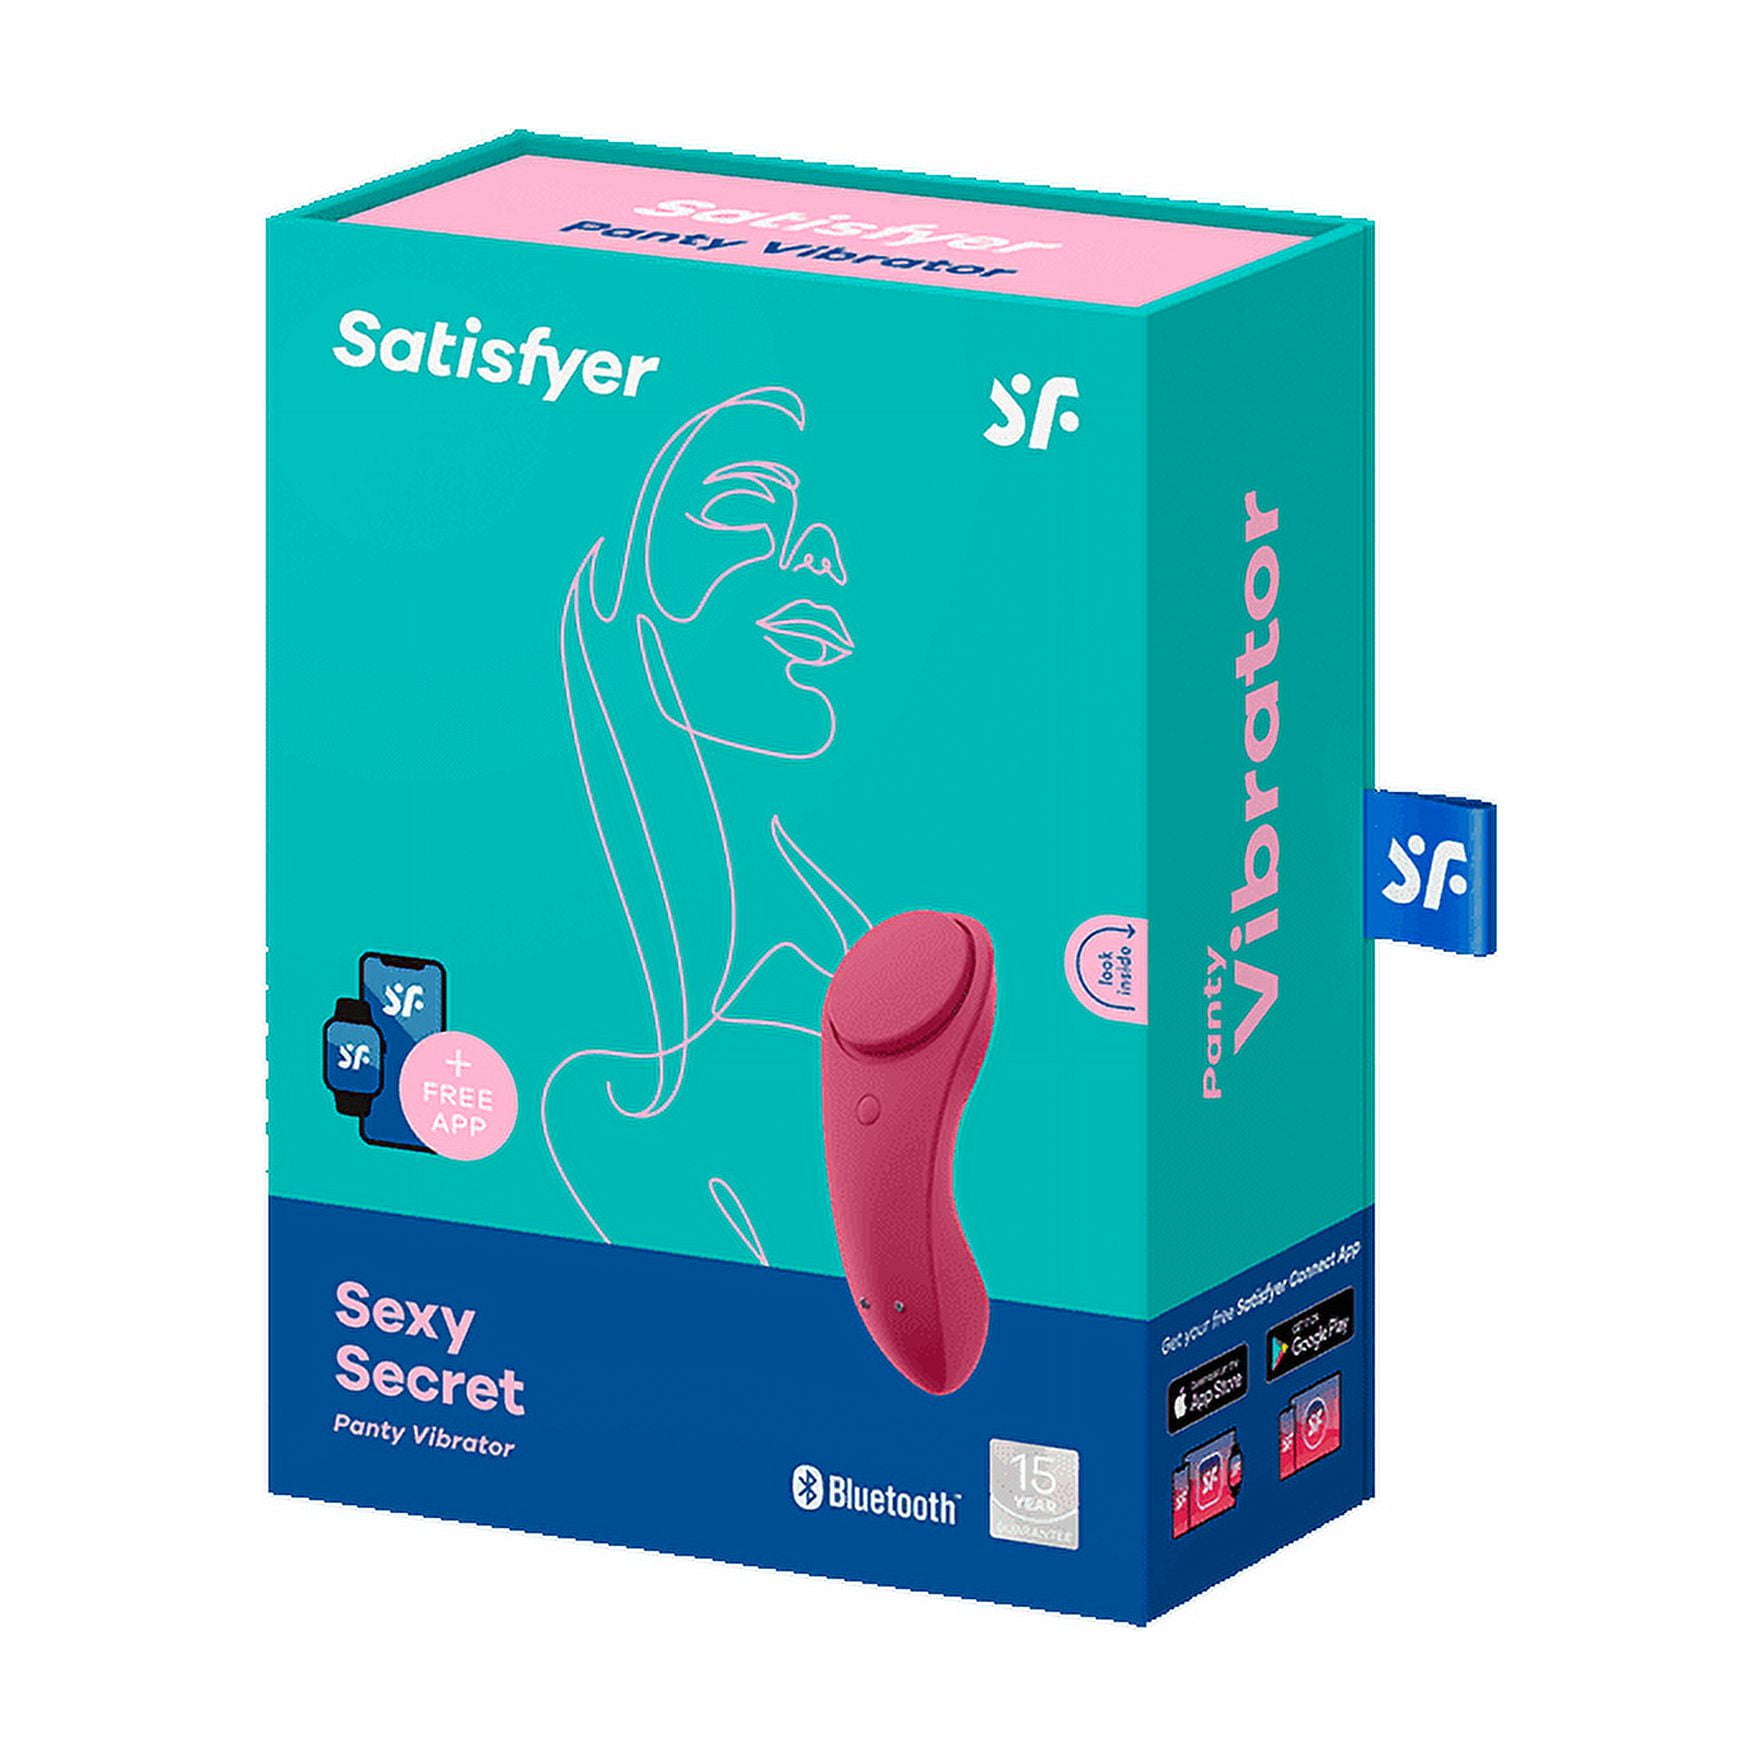 Satisfyer Sexy Secret Panty Vibrator with App Control - Vibrating Clitoris  Stimulator, Compatible with Satisfyer App, Waterproof, Rechargeable 